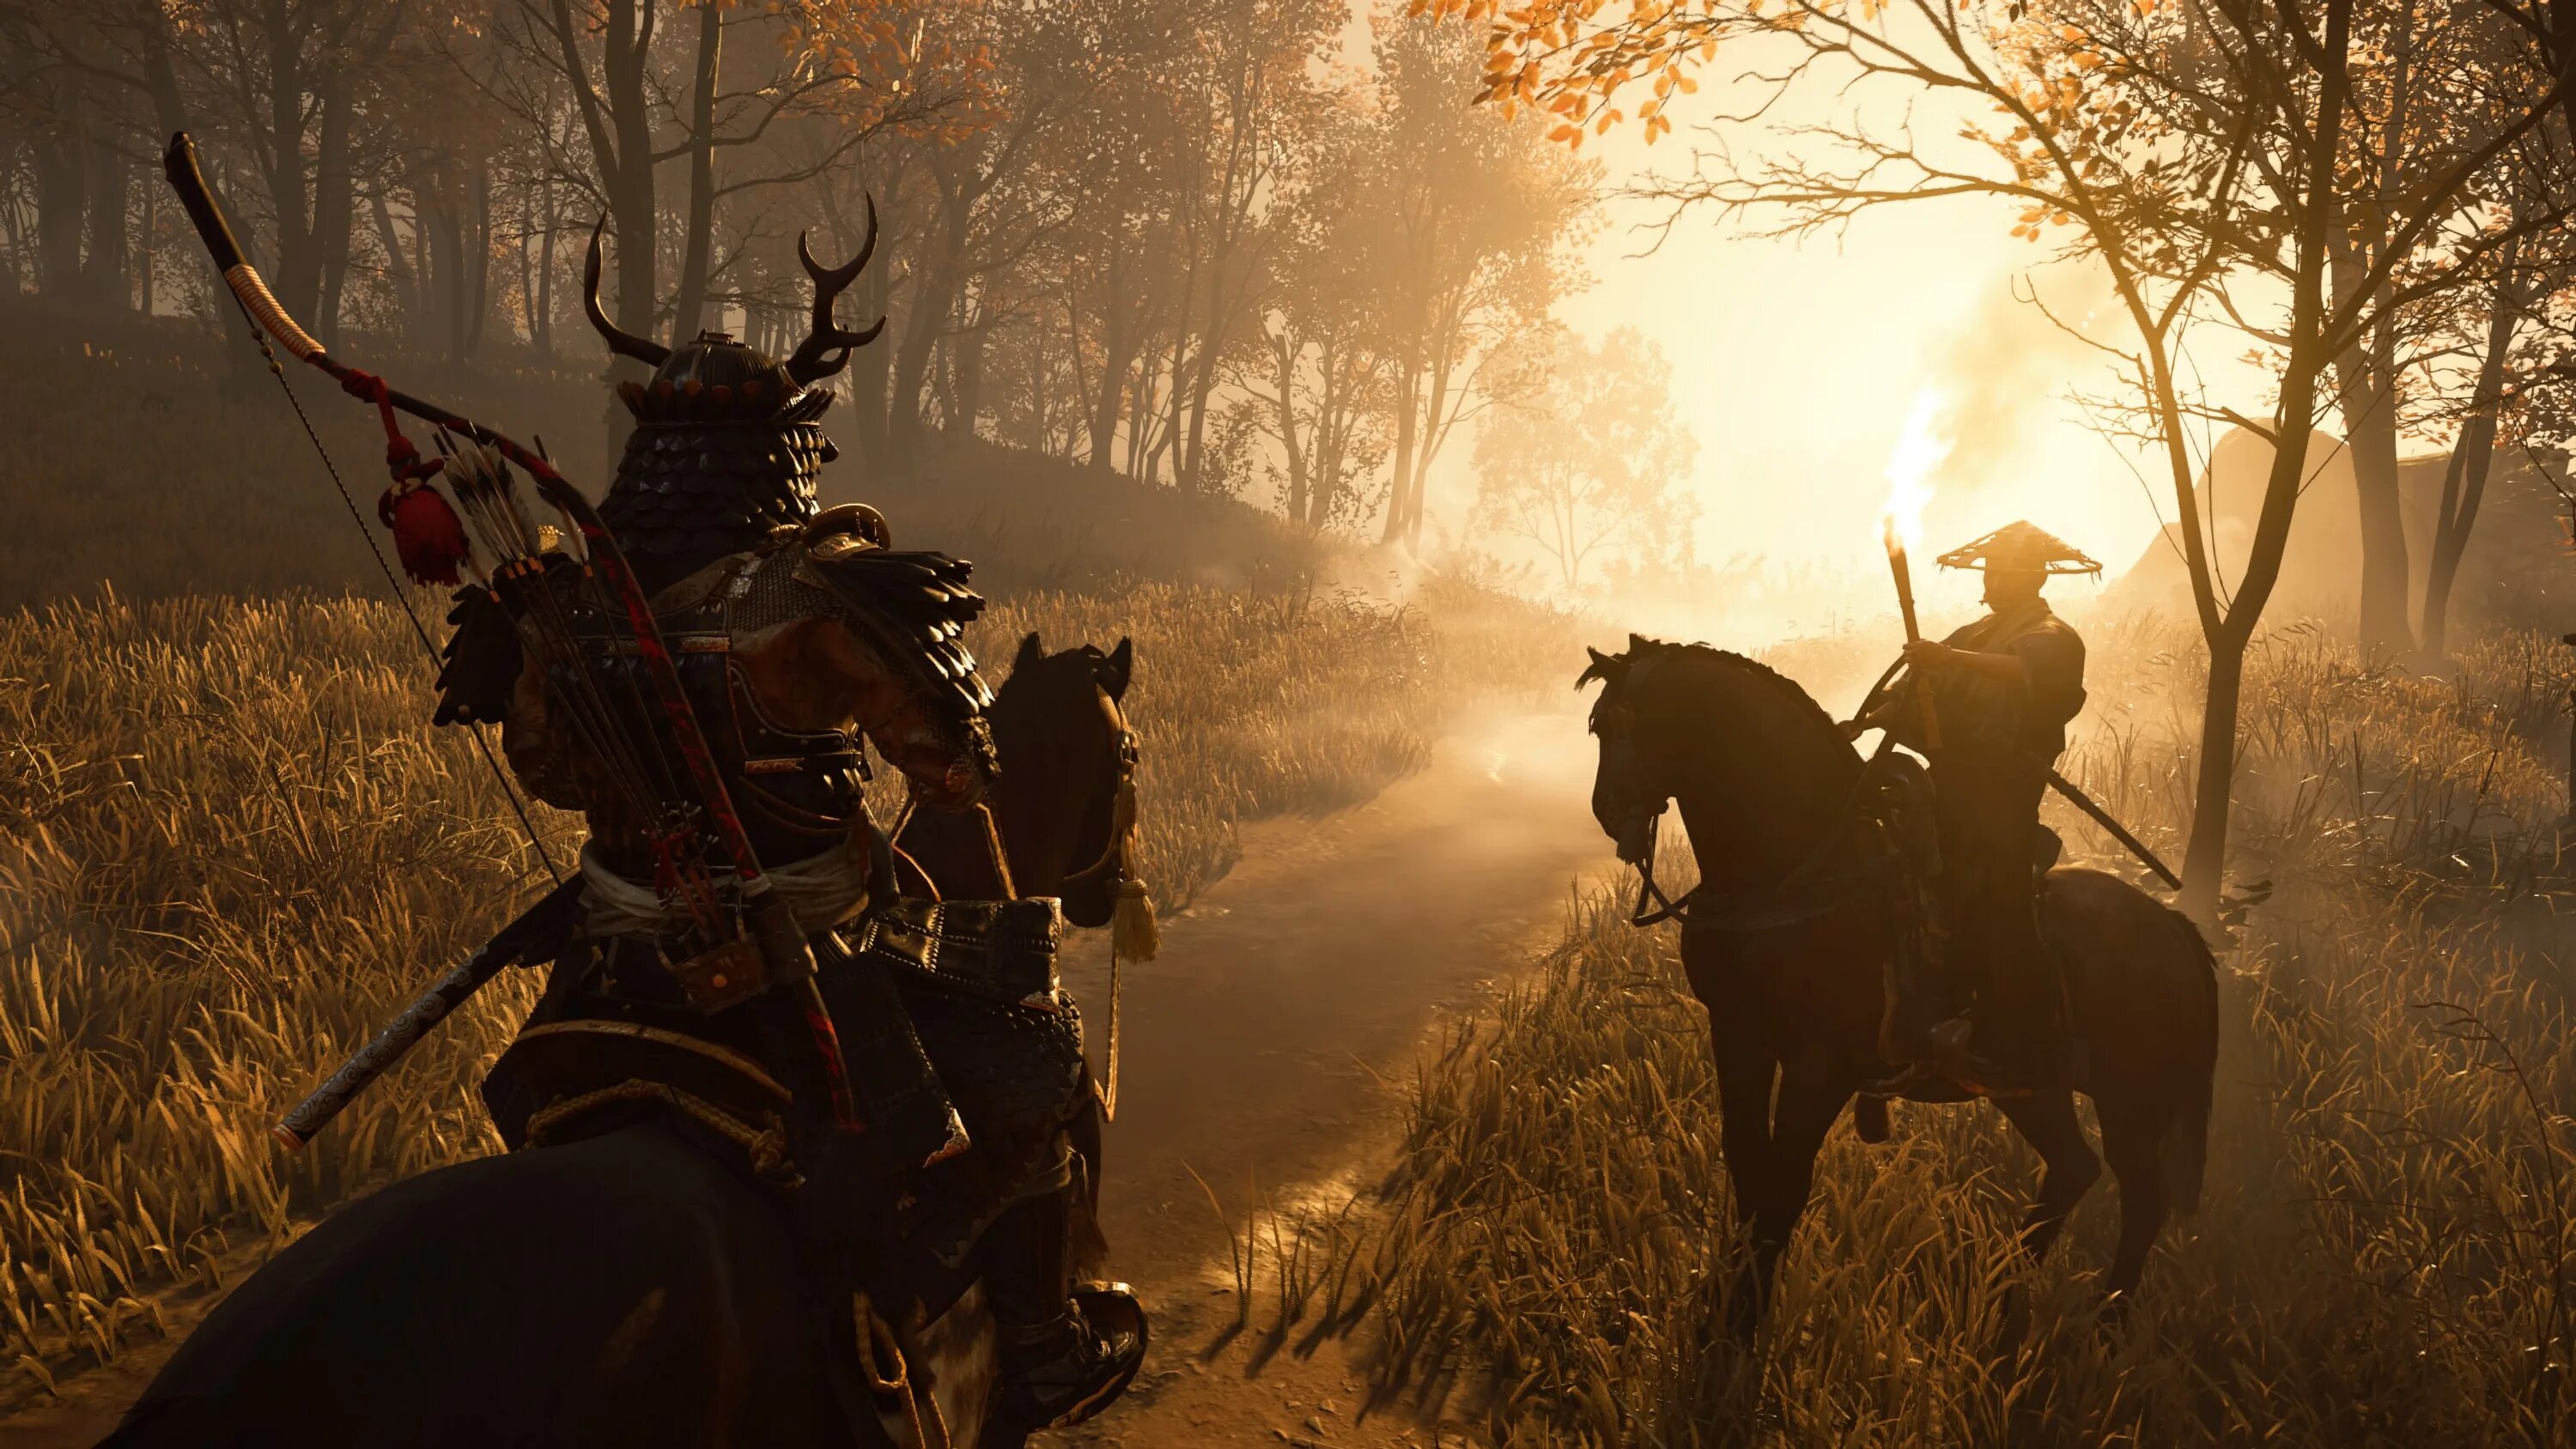 Ghost of tsushima pc system requirements. Ghost of Tsushima. Ghost of Tsushima 2. Призрак в РДР 2. Ghost of Tsushima аванпосты.